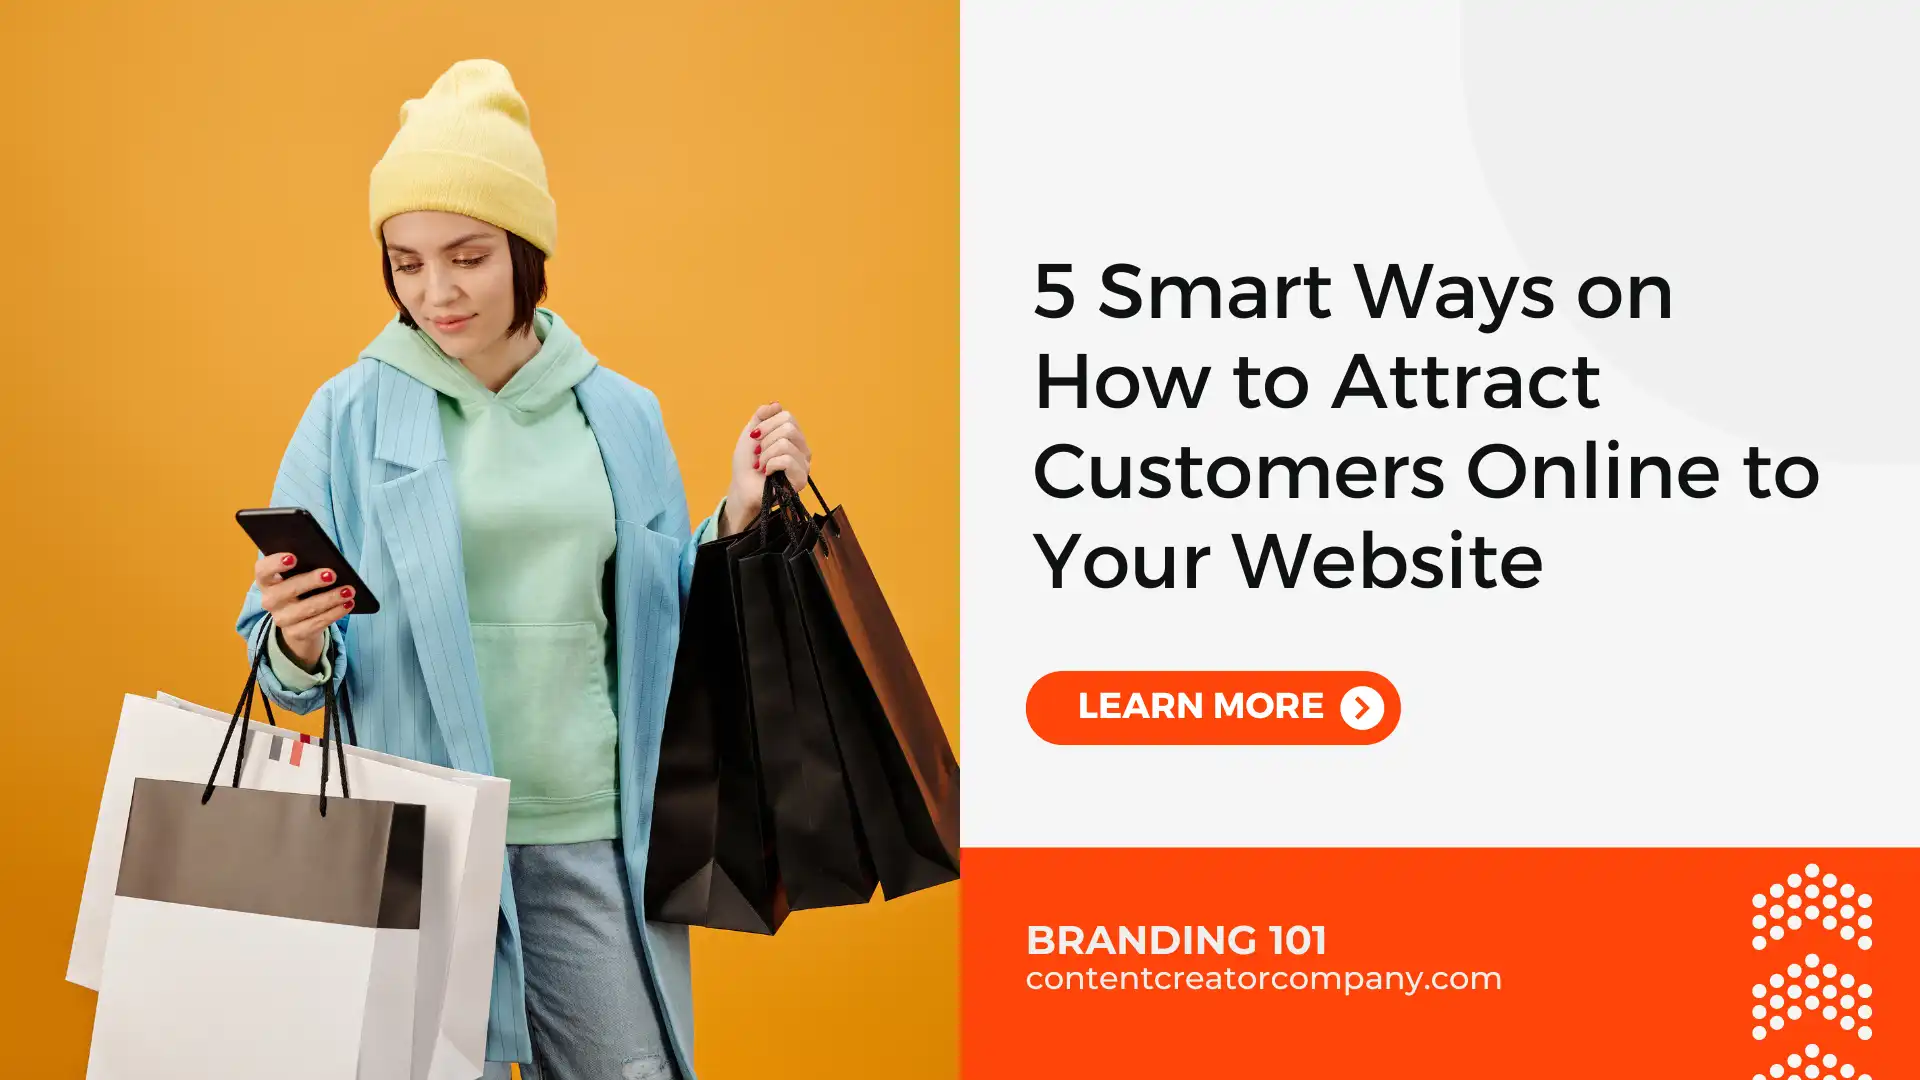 5 Smart Ways on How to Attract Customers Online to Your Website